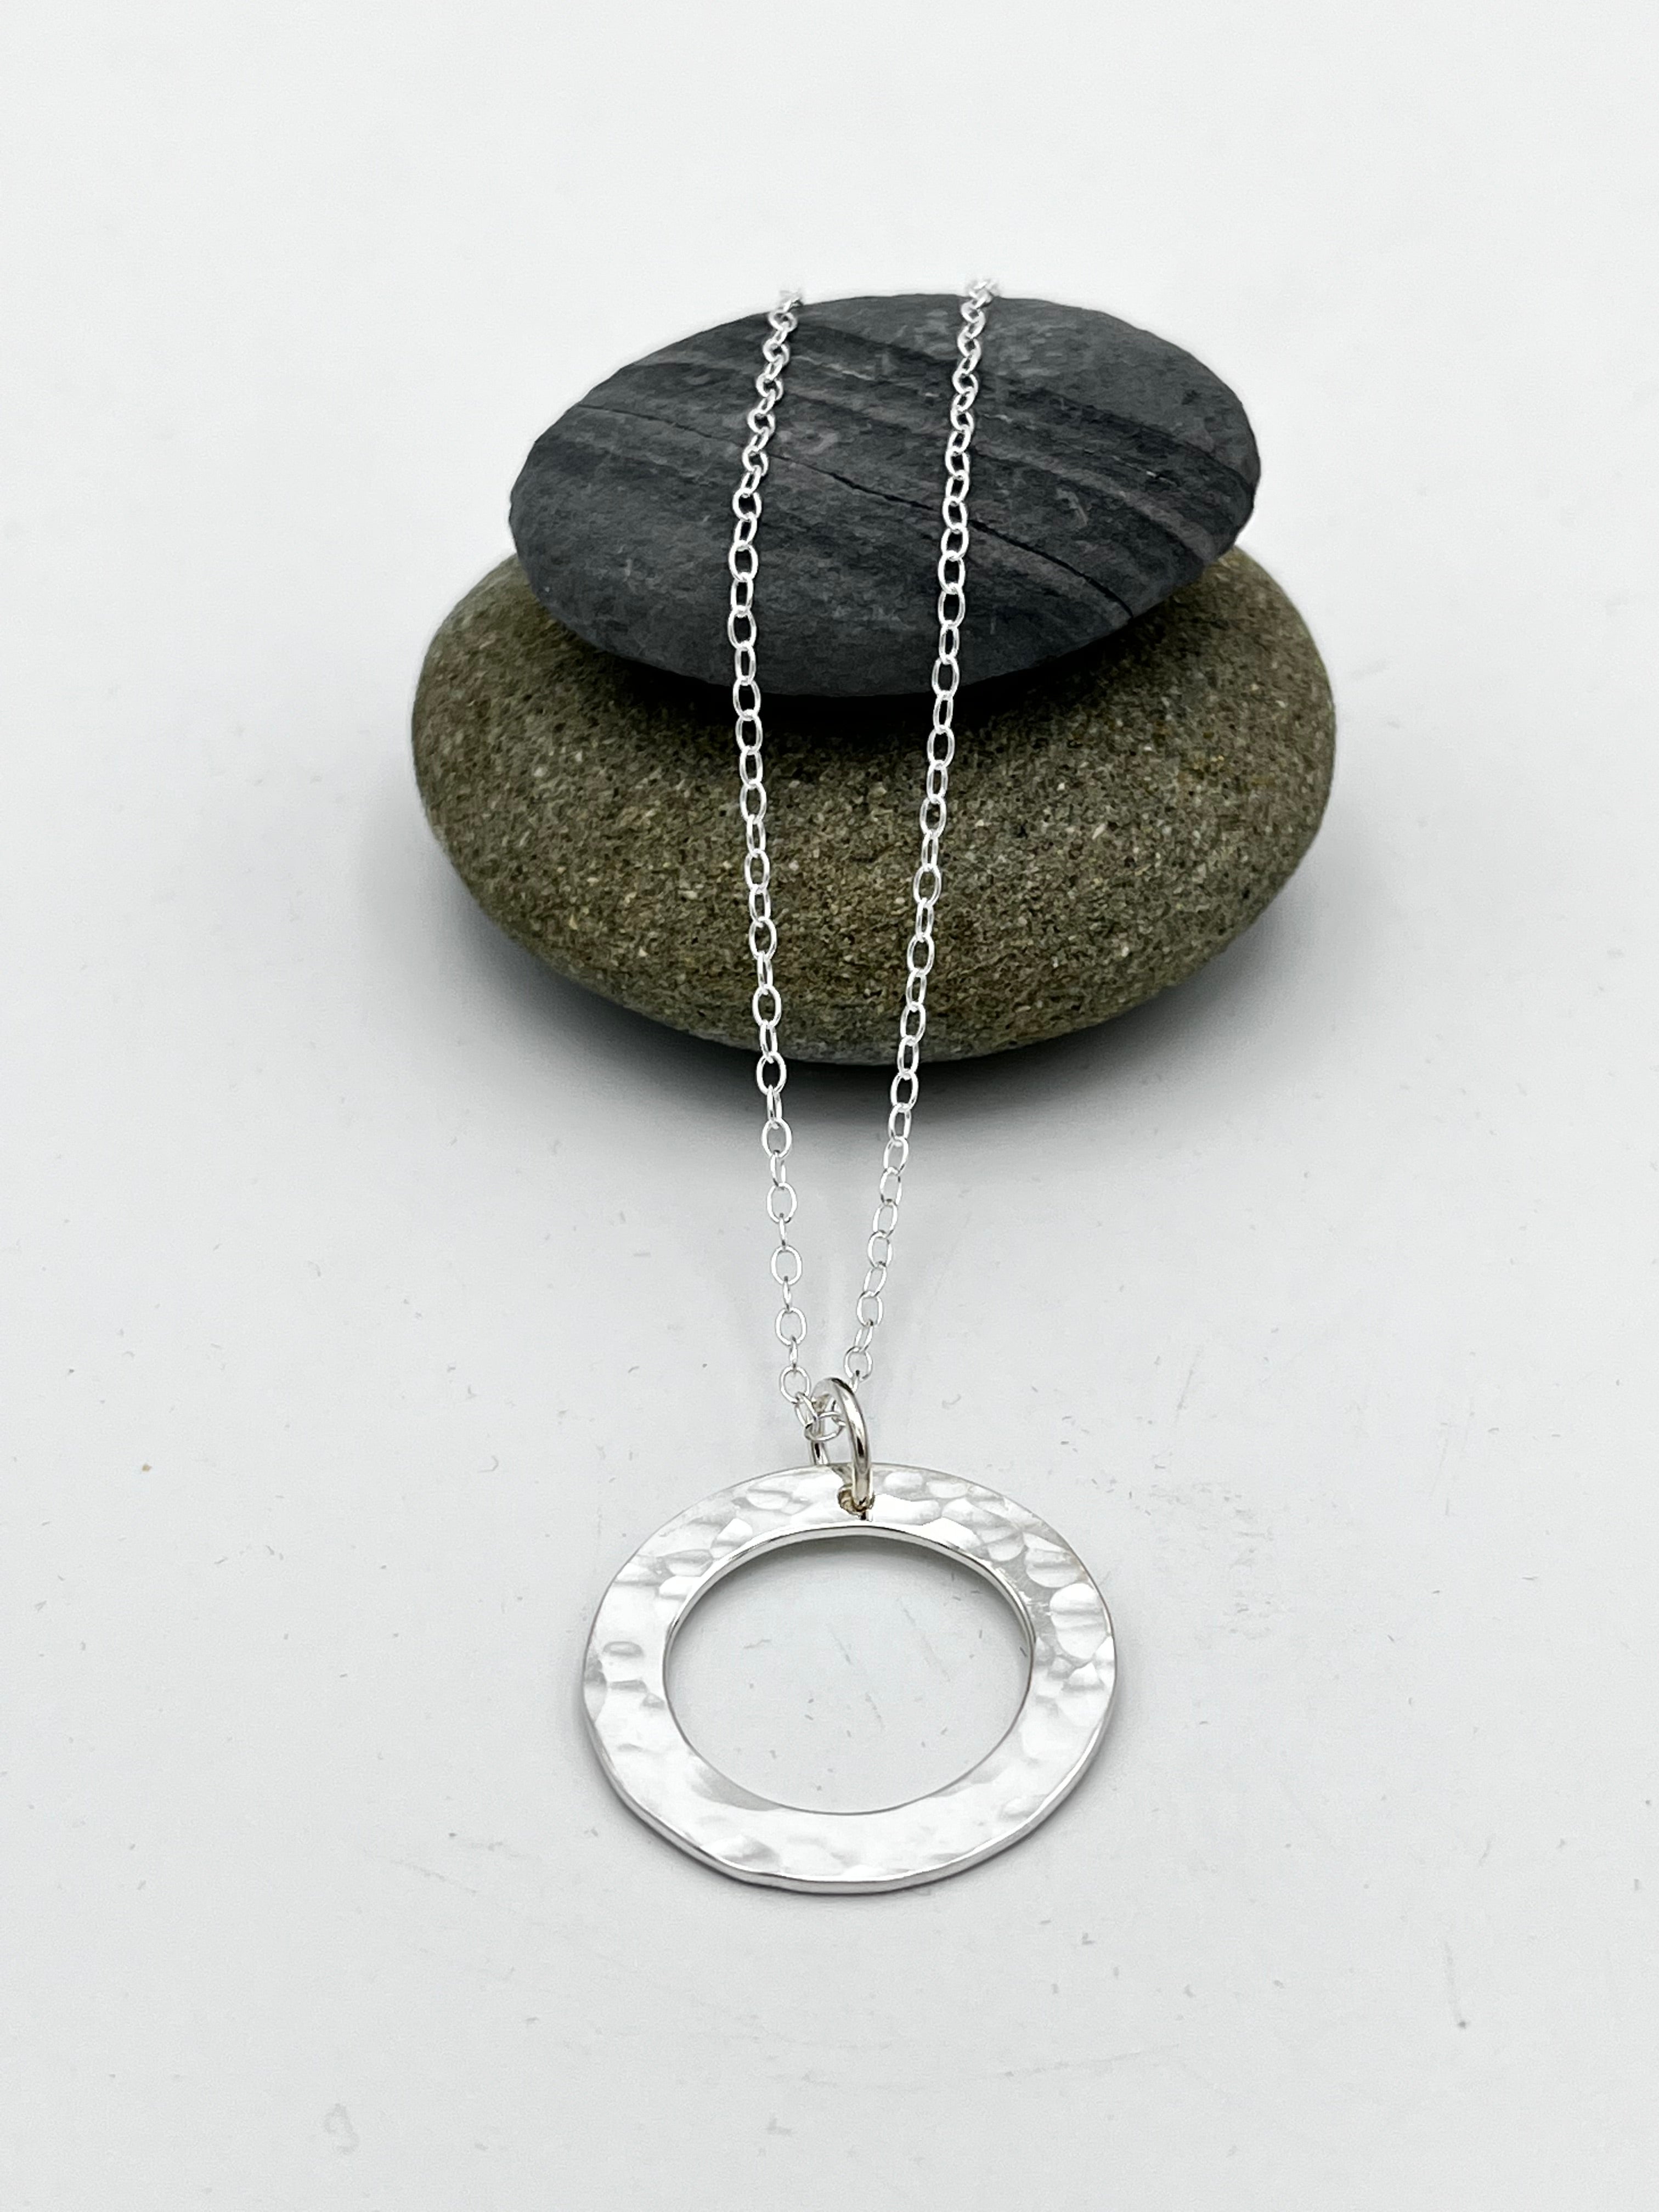 Washer pendant 25mm wide hammered finish on 16" trace chain